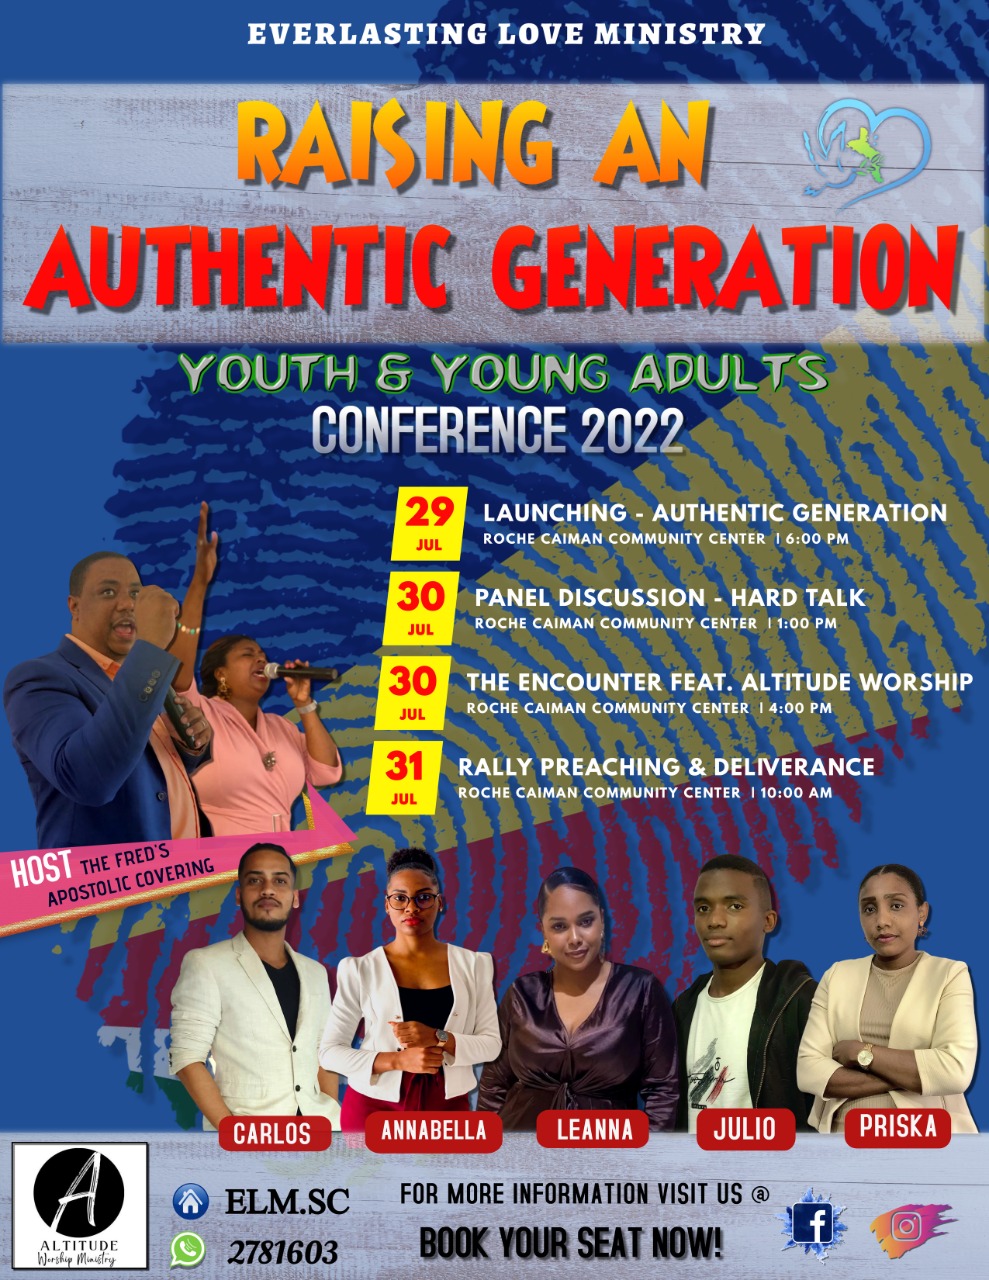 Youth & Young Adults Conference 2022